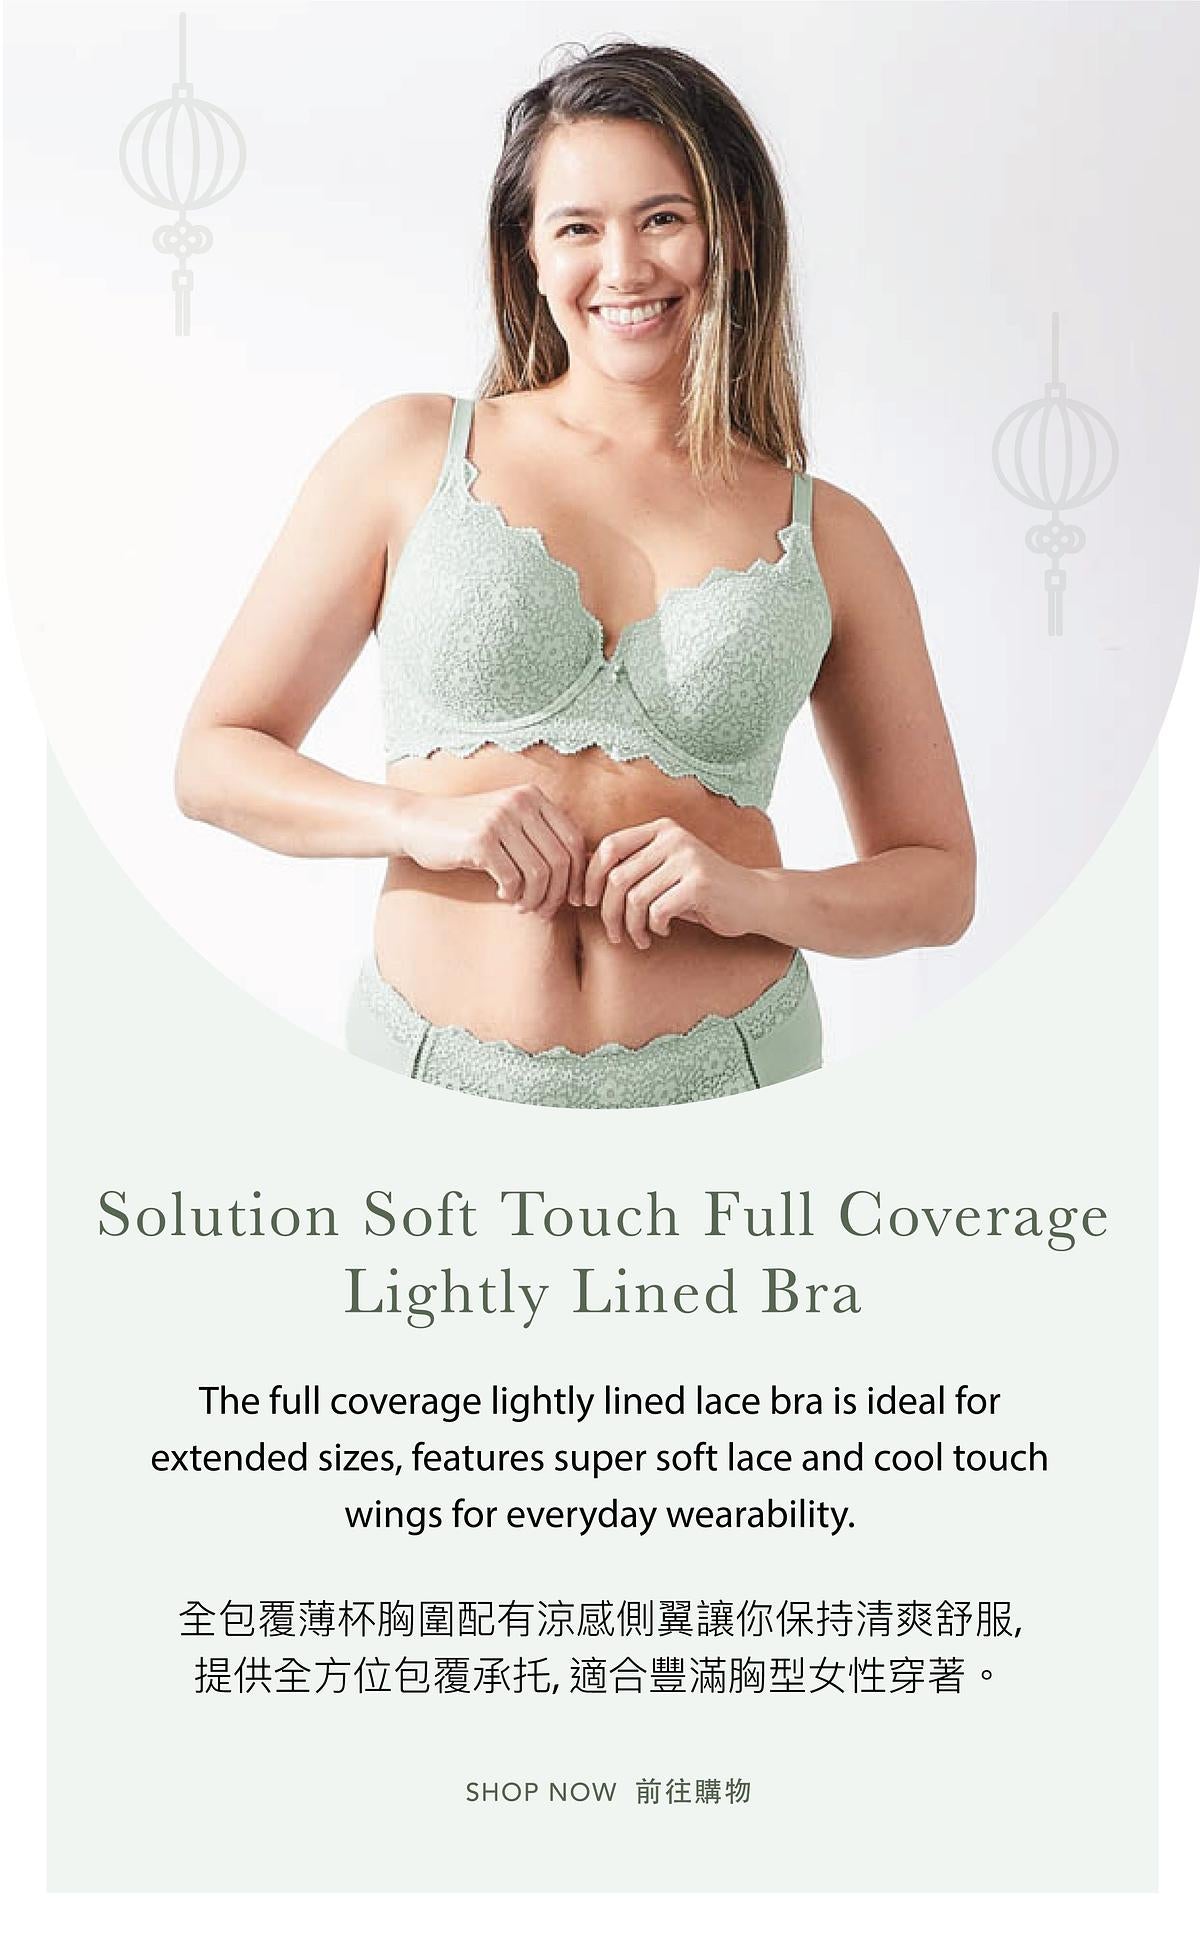 Stylist Soft Touch Full Coverage Lightly Lined Lace Bra – Her own words